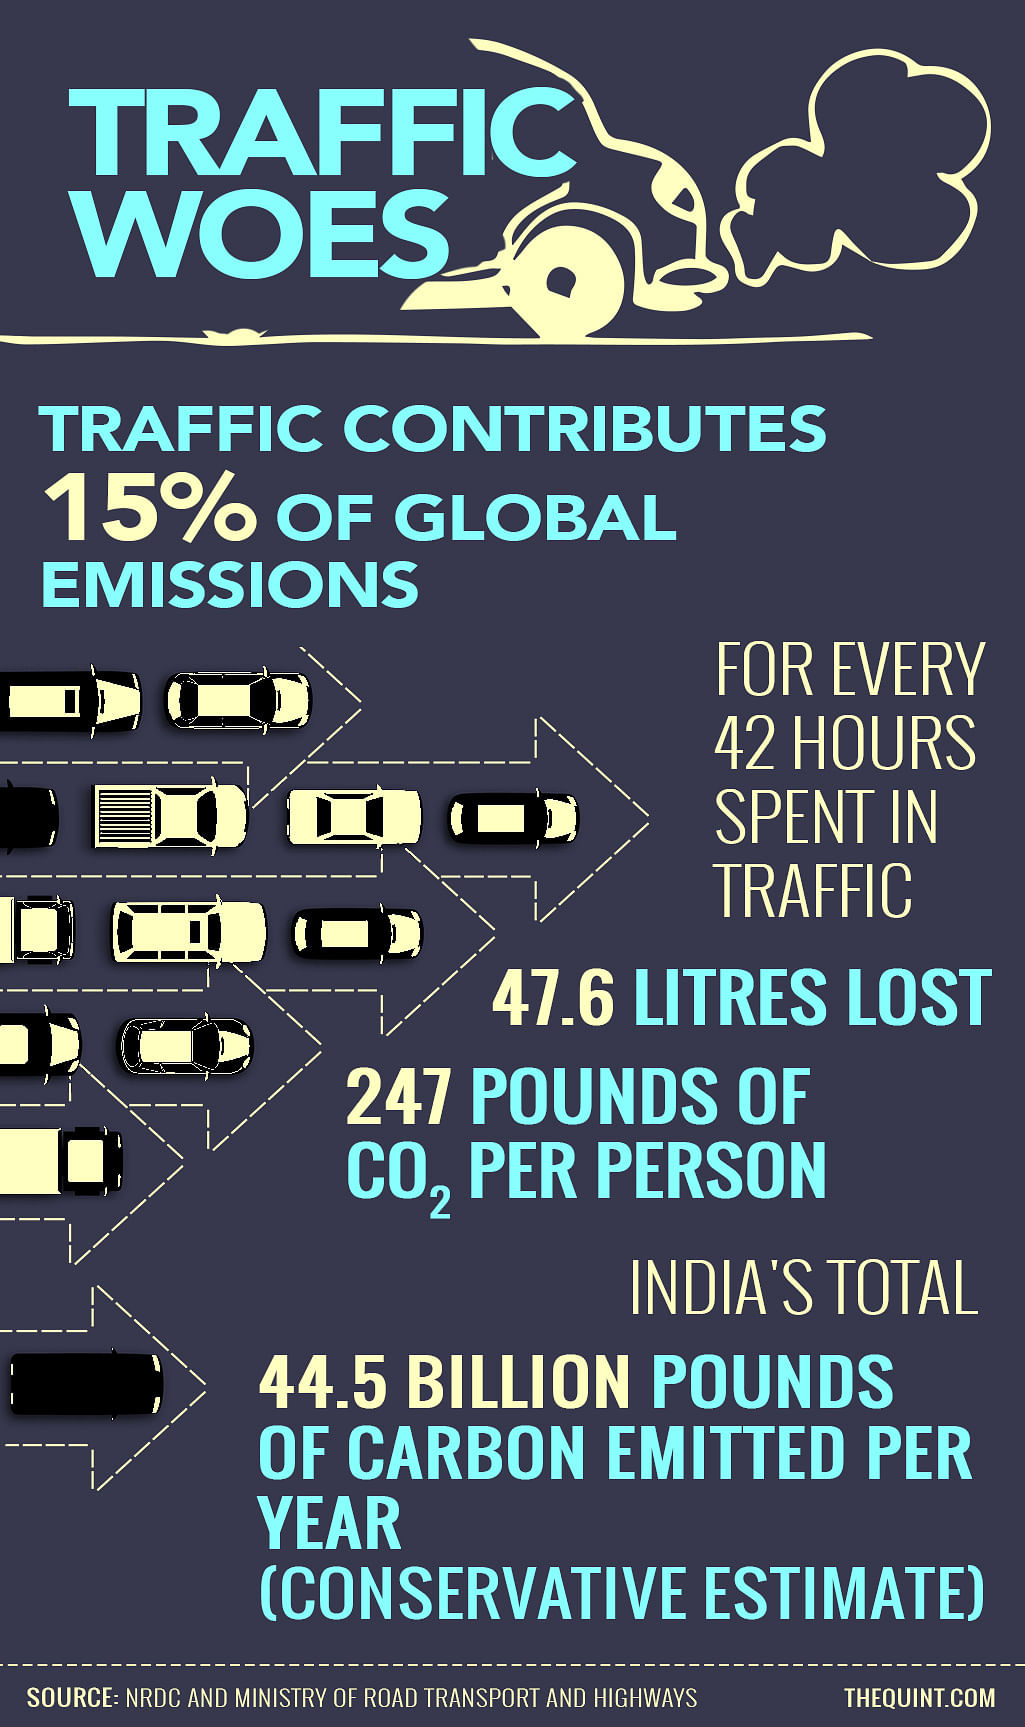 Millions of vehicles churn fumes into the atmosphere as we spend hours in traffic.